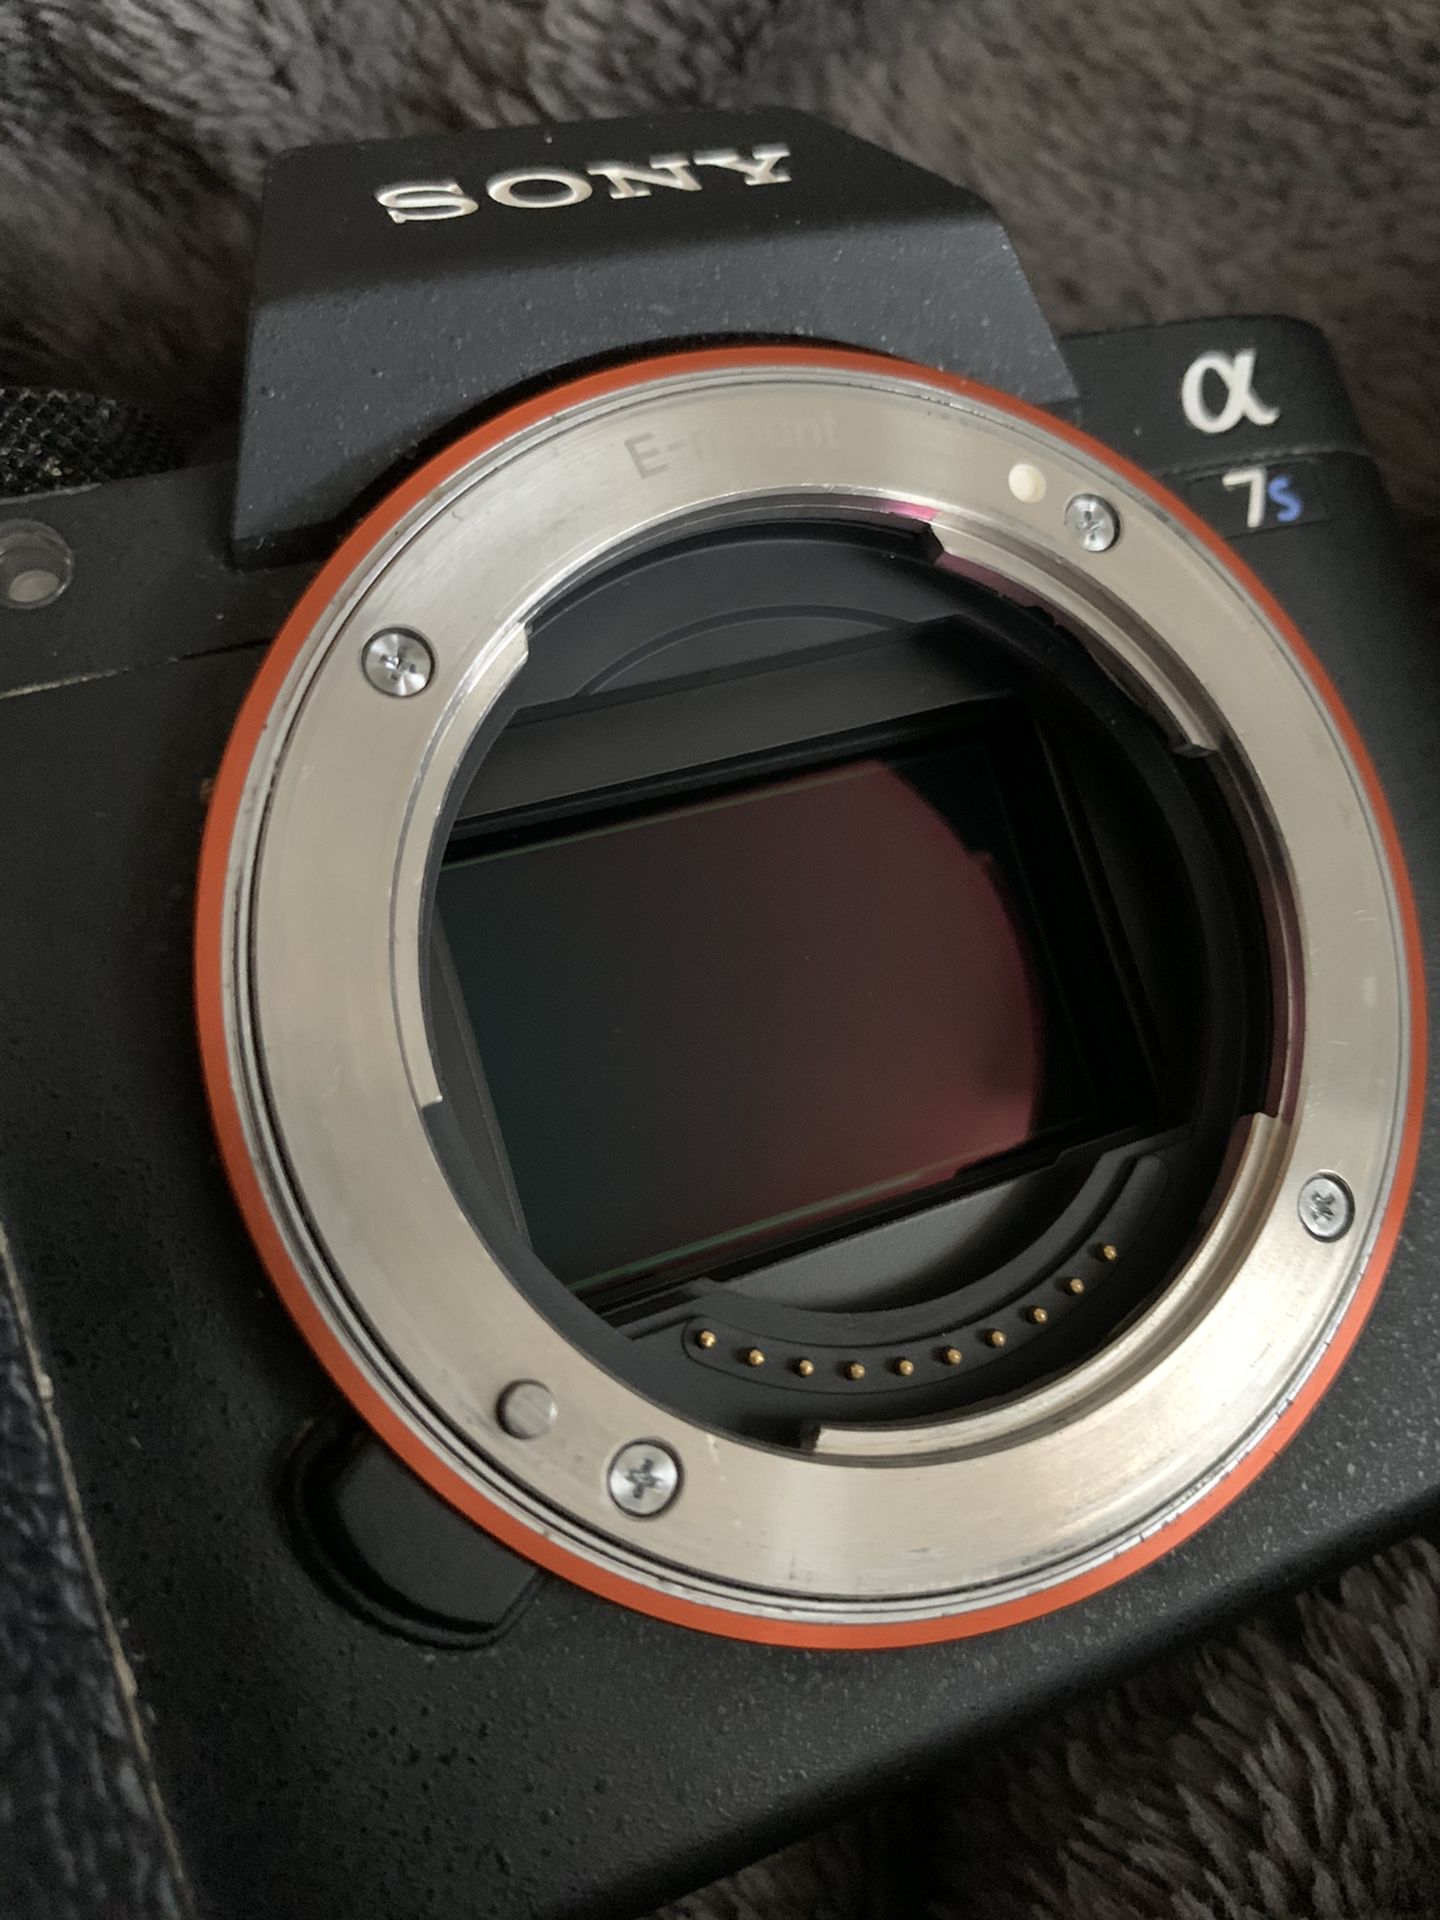 Sony A7sii low light camera (body + batteries)